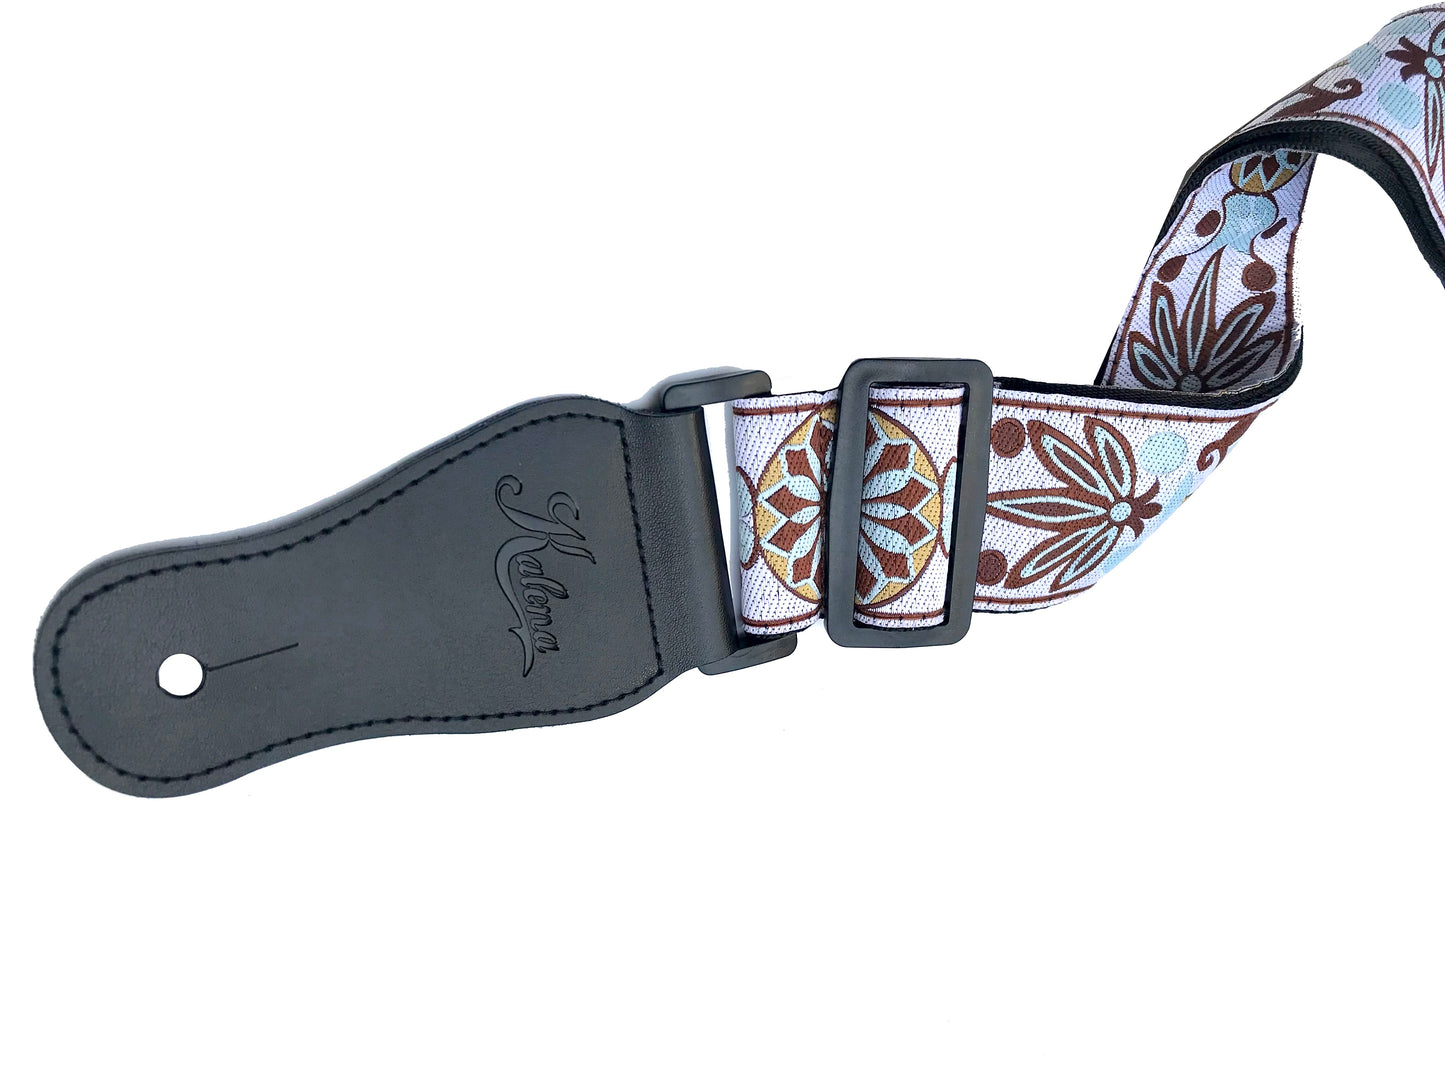 Kalena 2 Pin Guitar Strap Buckle Style Silver Flower (jacquard band+nylon+real leather) - Kalena Instruments